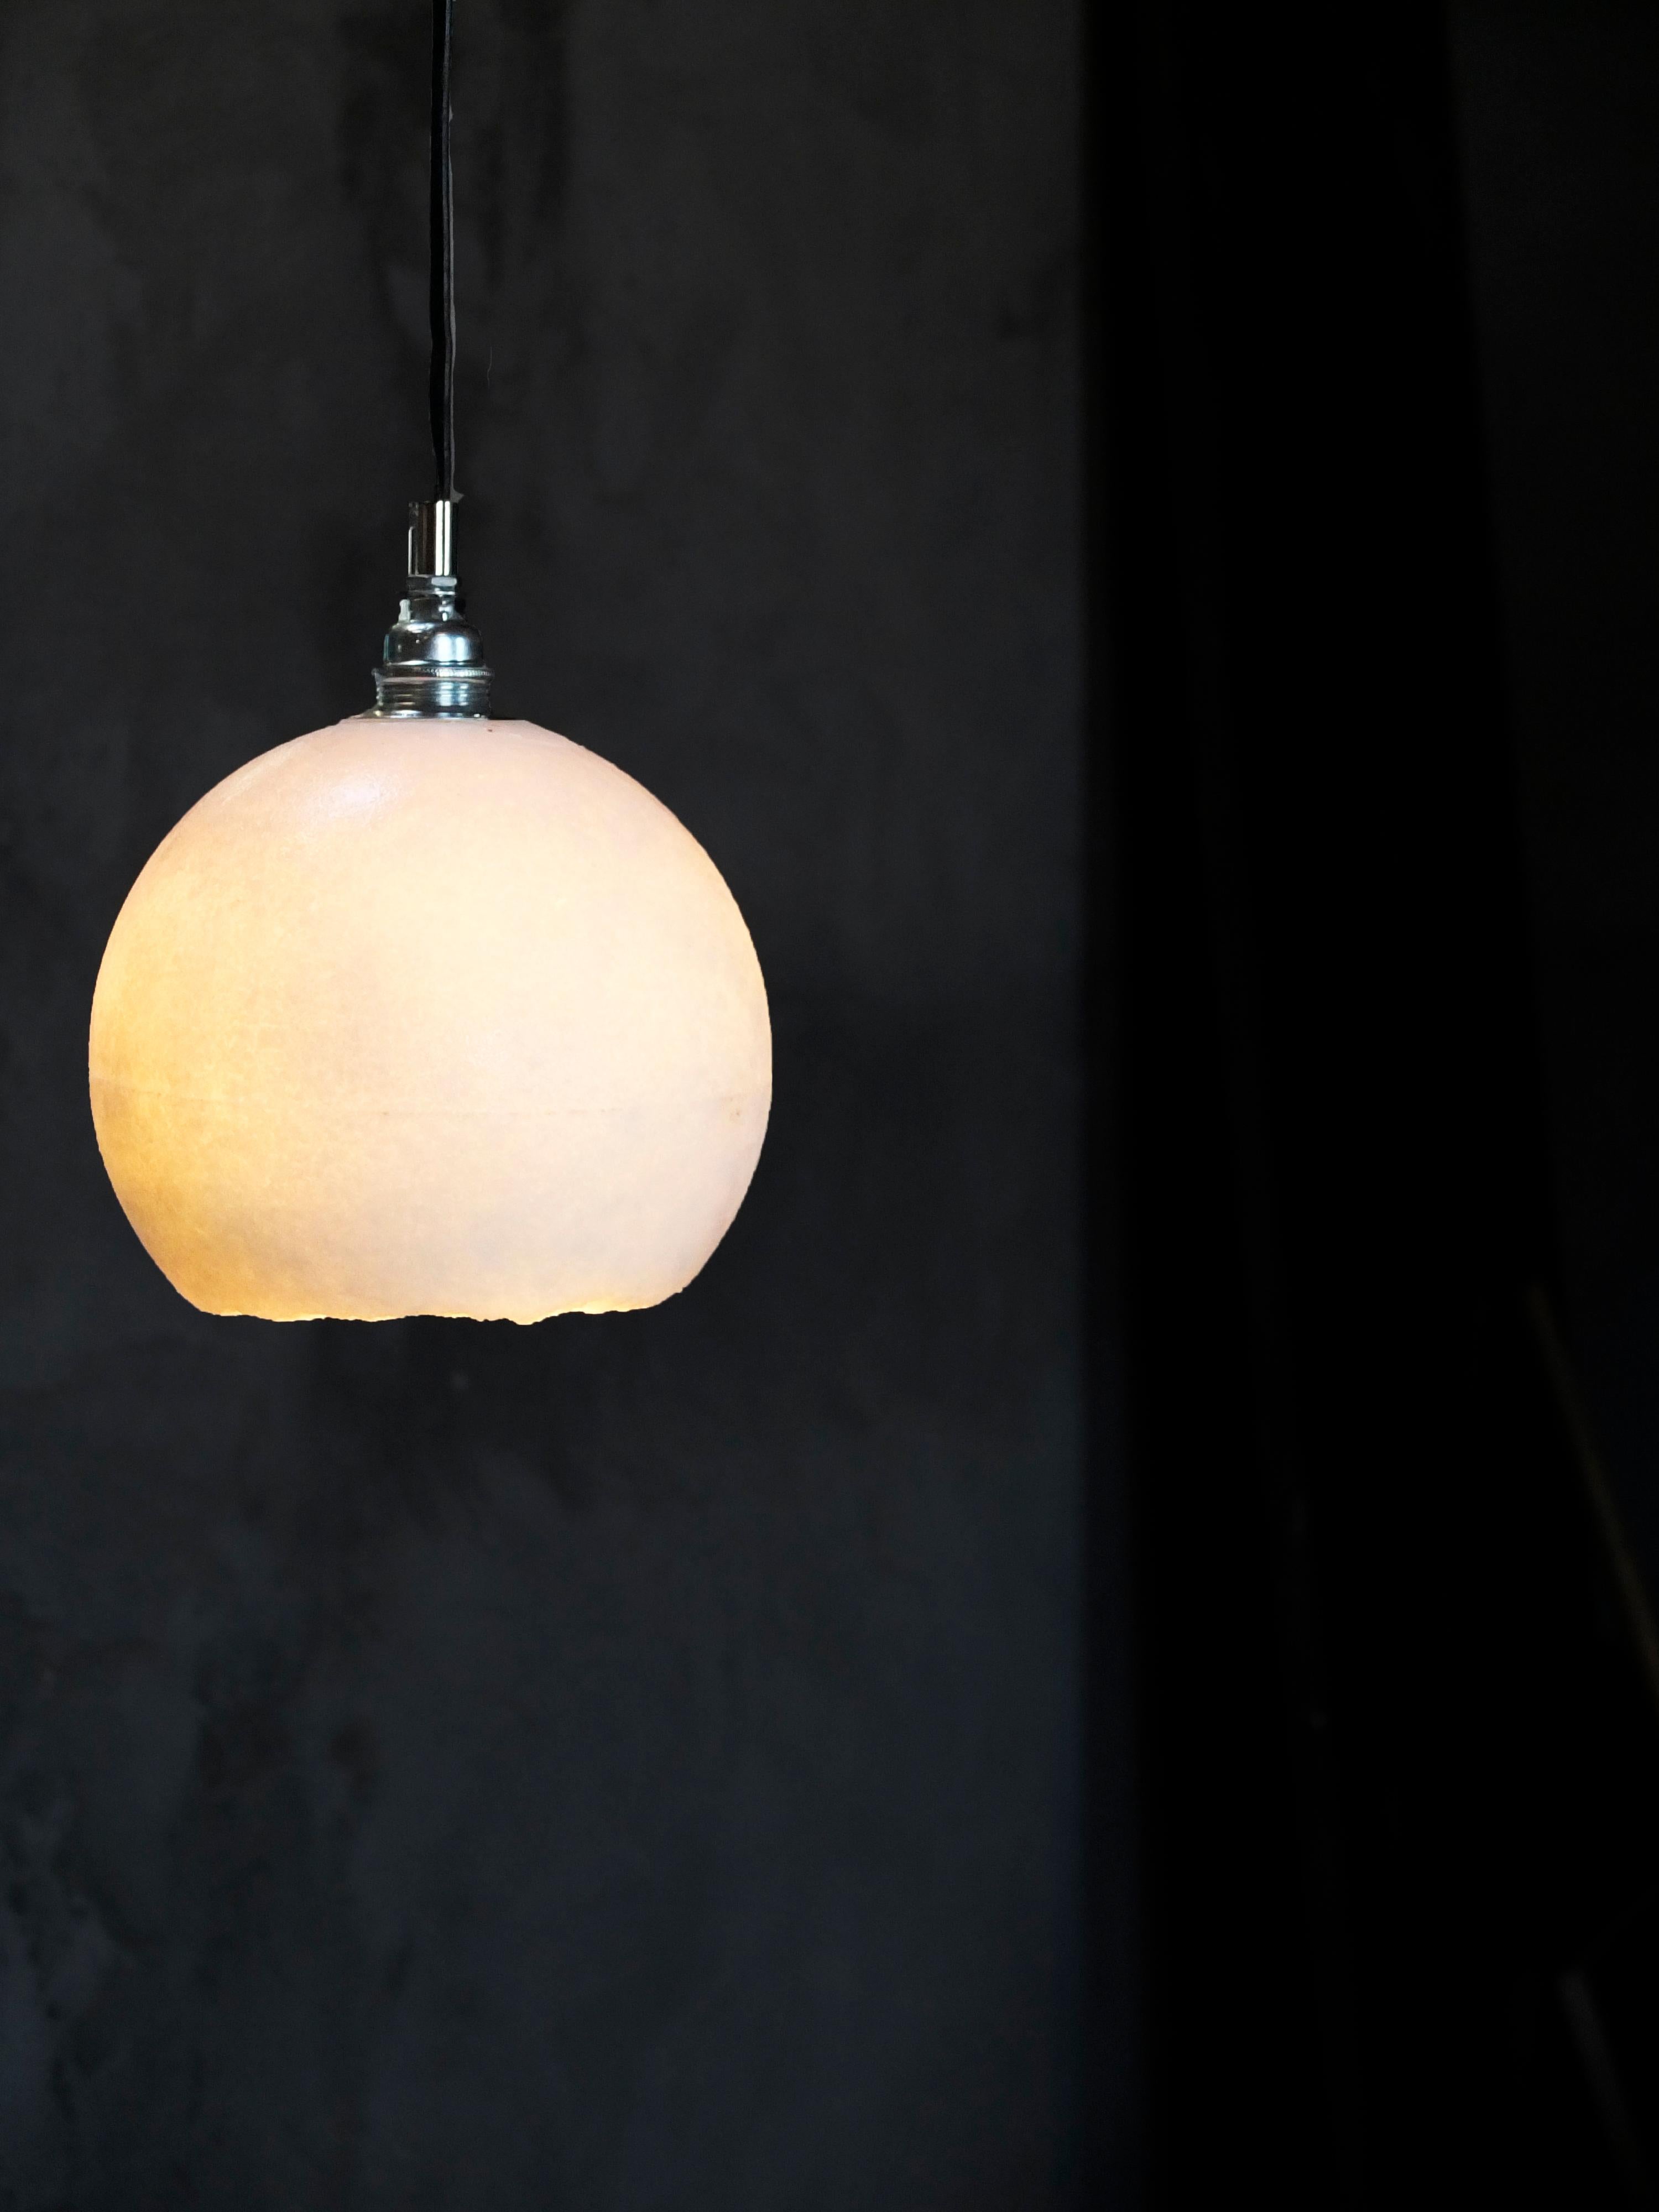 Ellipse Lamp by Roxane Lahidji
Dimensions: D 35 x H 40 cm
Material: Marbled salts
A unique award-winning technique developed by Roxane Lahidji

Award winner of Bolia Design Awards 2019 and FD100 and present in the collections of the Design Museum